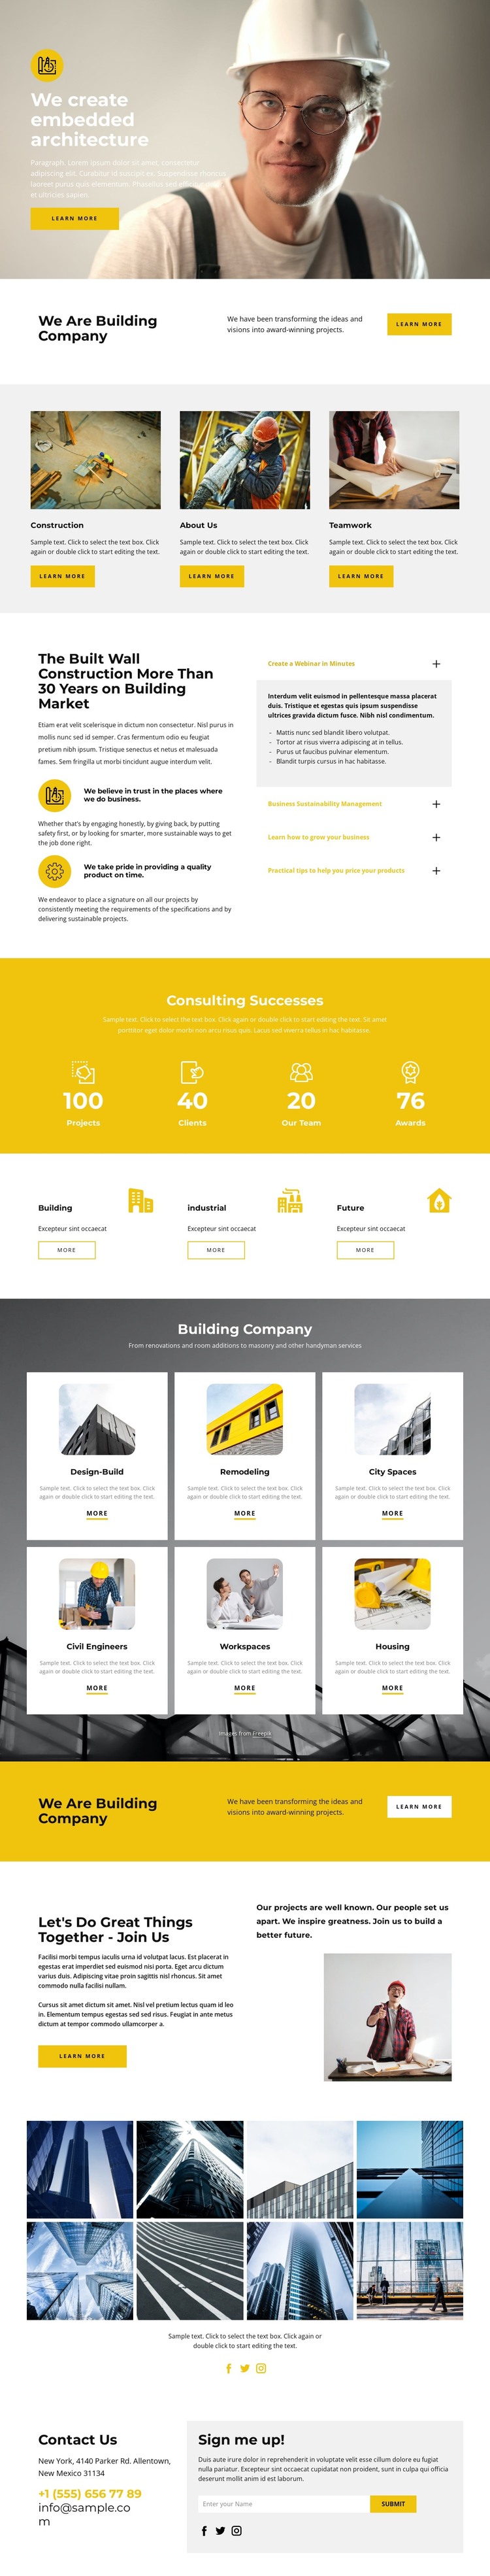 Let's build a turnkey HTML Template